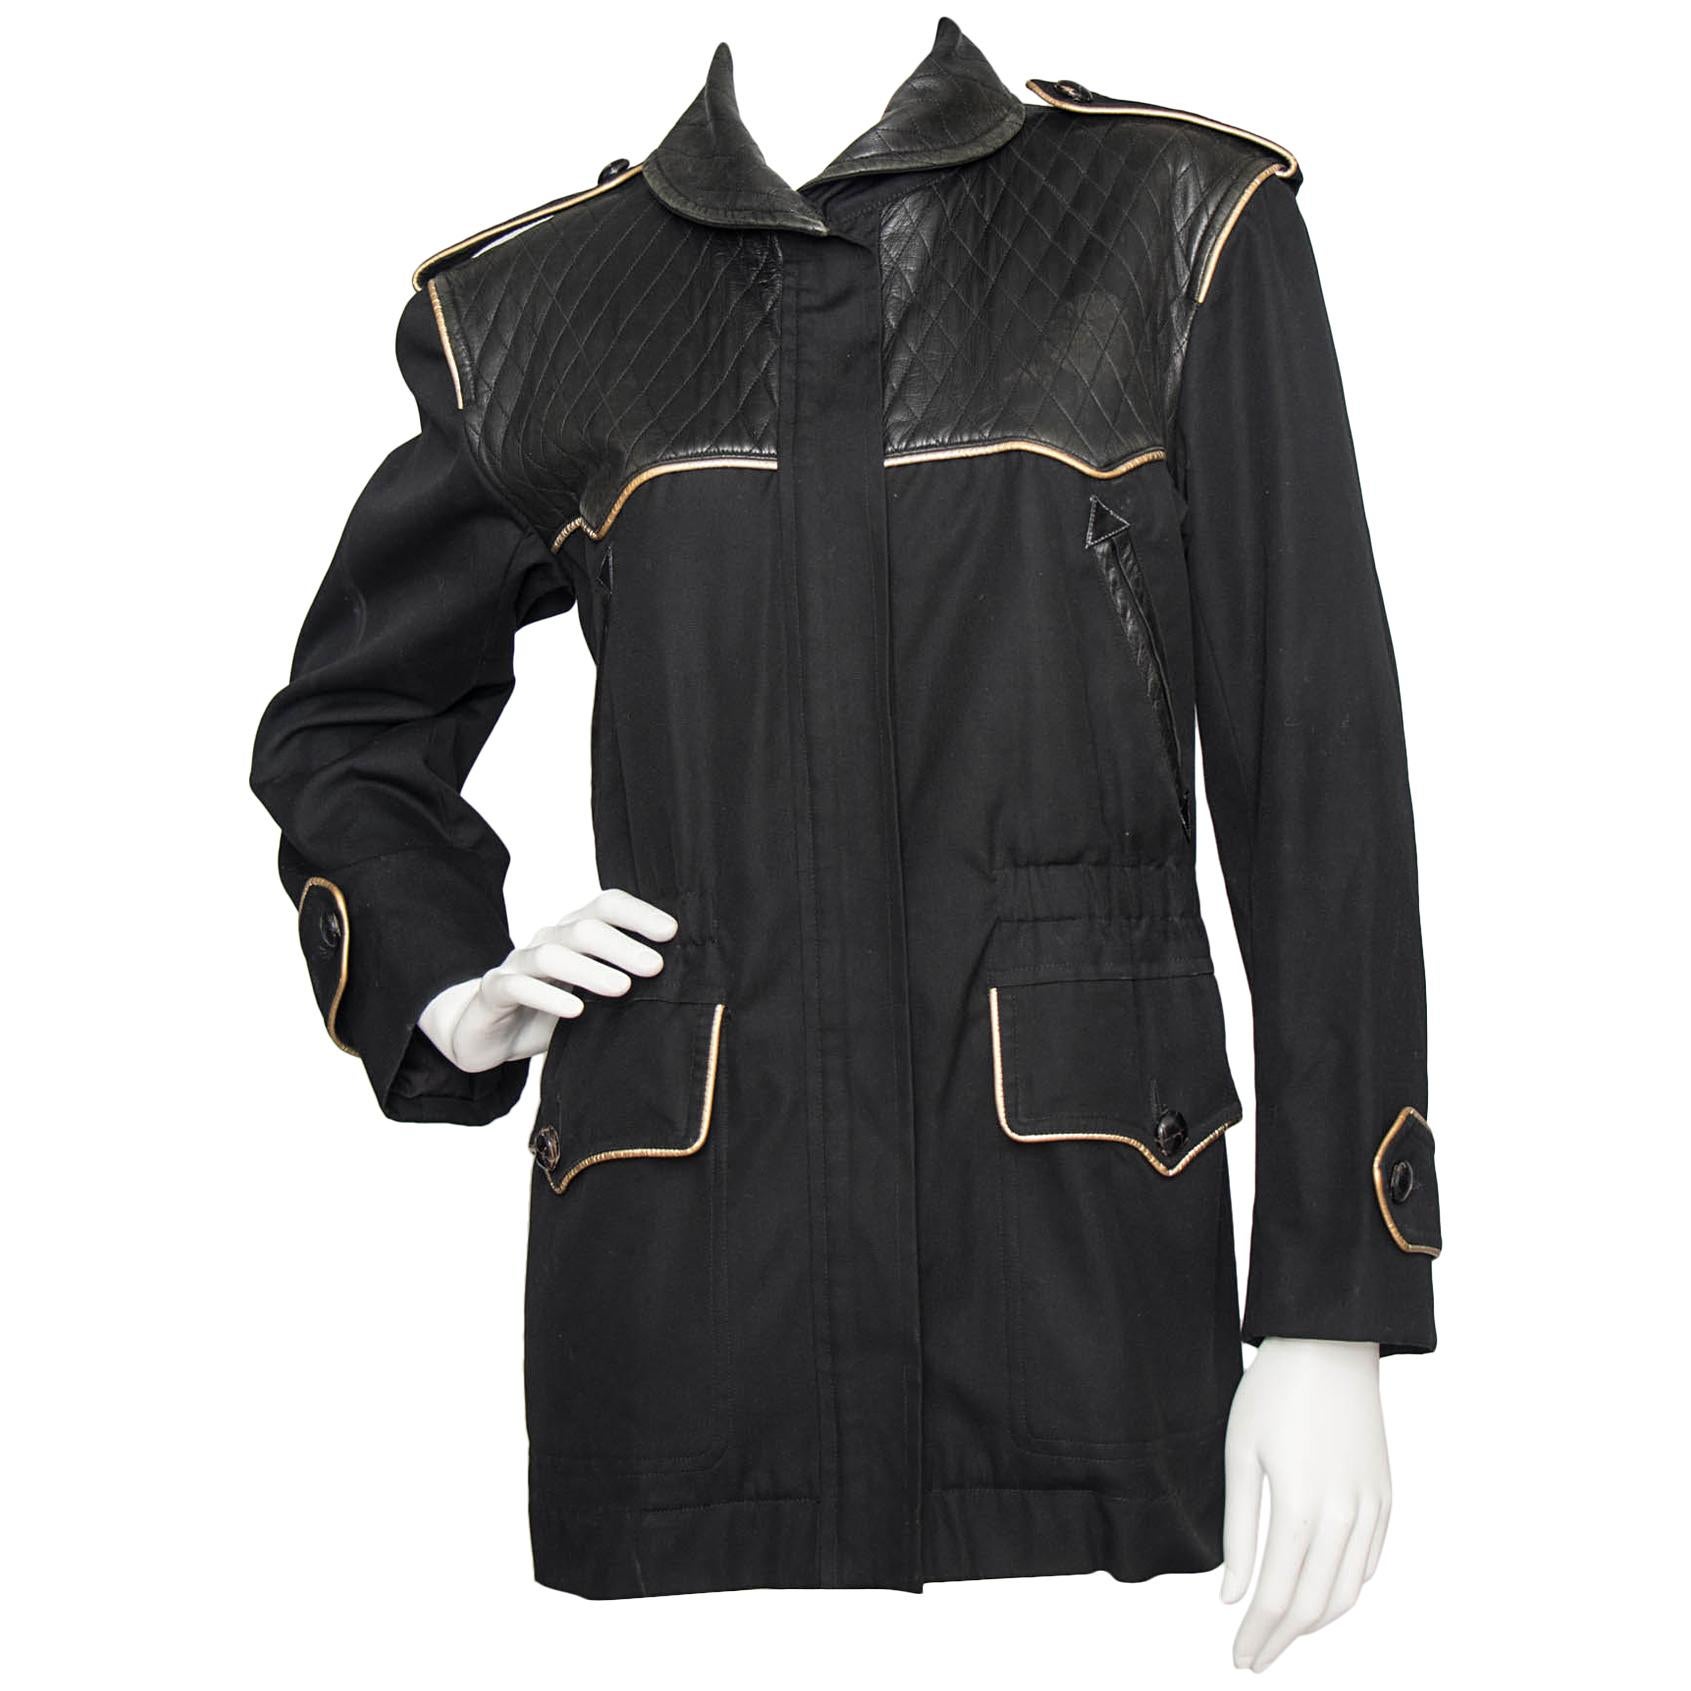 Yves Saint Laurent Rive Gauche Jacket with Leather and Gold Trim, 1980s